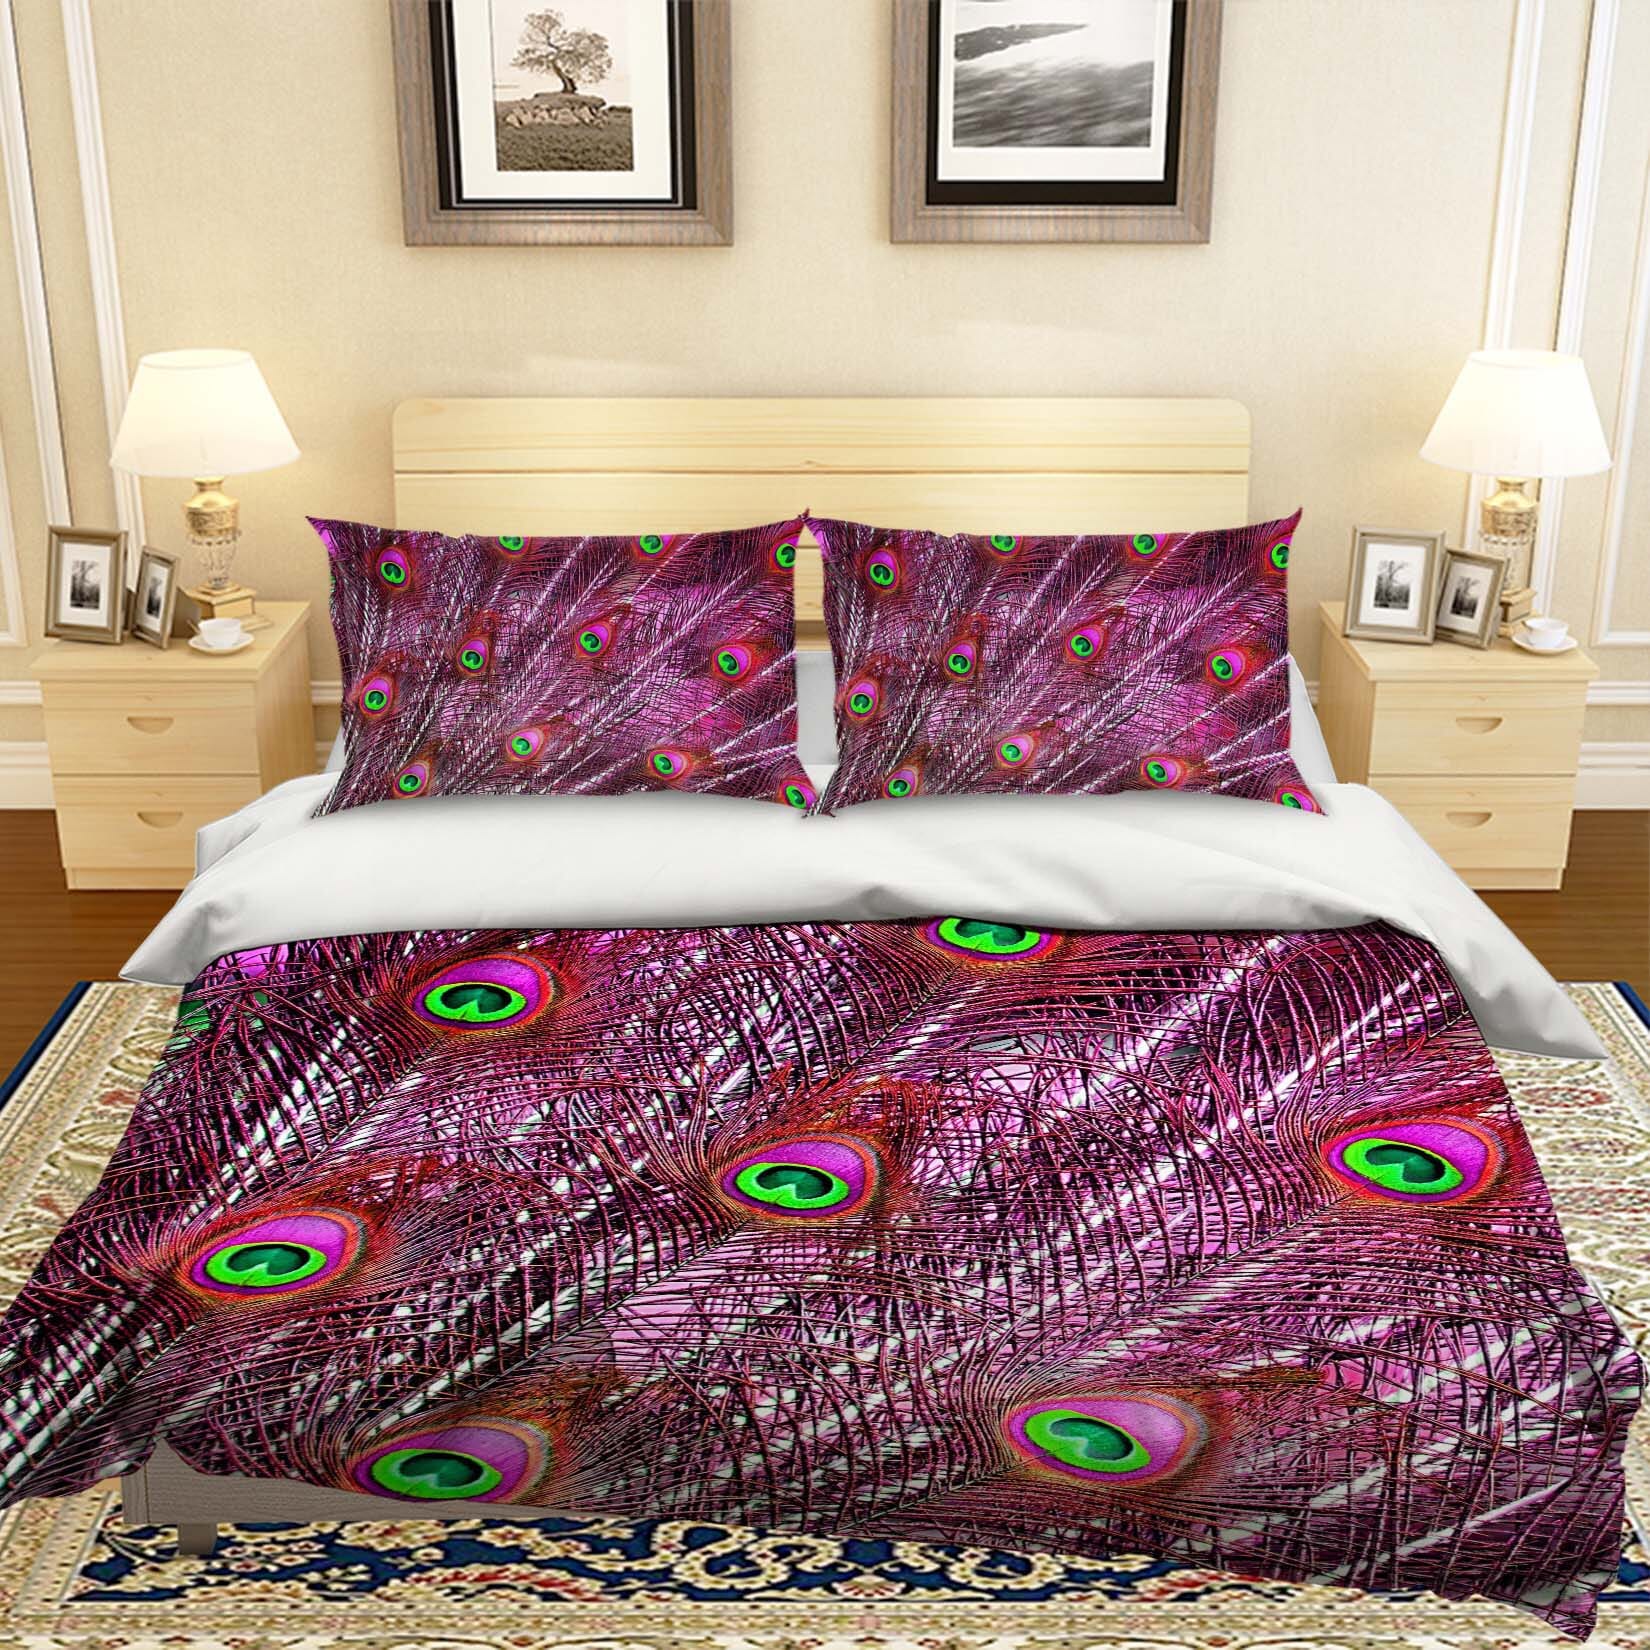 3D Peacock Feather 1921 Bed Pillowcases Quilt Quiet Covers AJ Creativity Home 